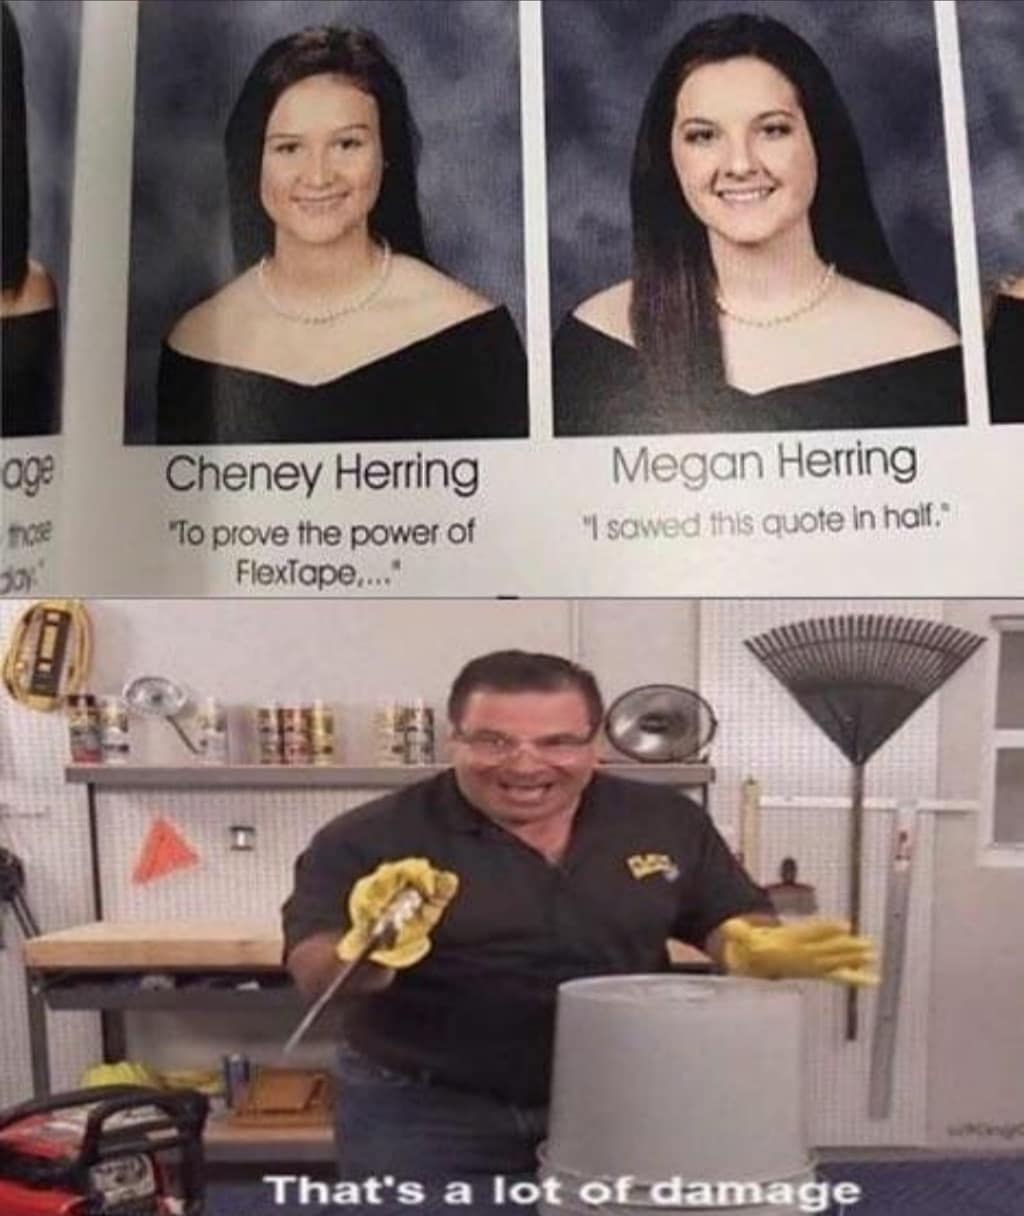 thats a lot of damage - age Cheney Herring "To prove the power of FlexTape...." Megan Herring "I sowed this quote in half. ze That's a lot of damage